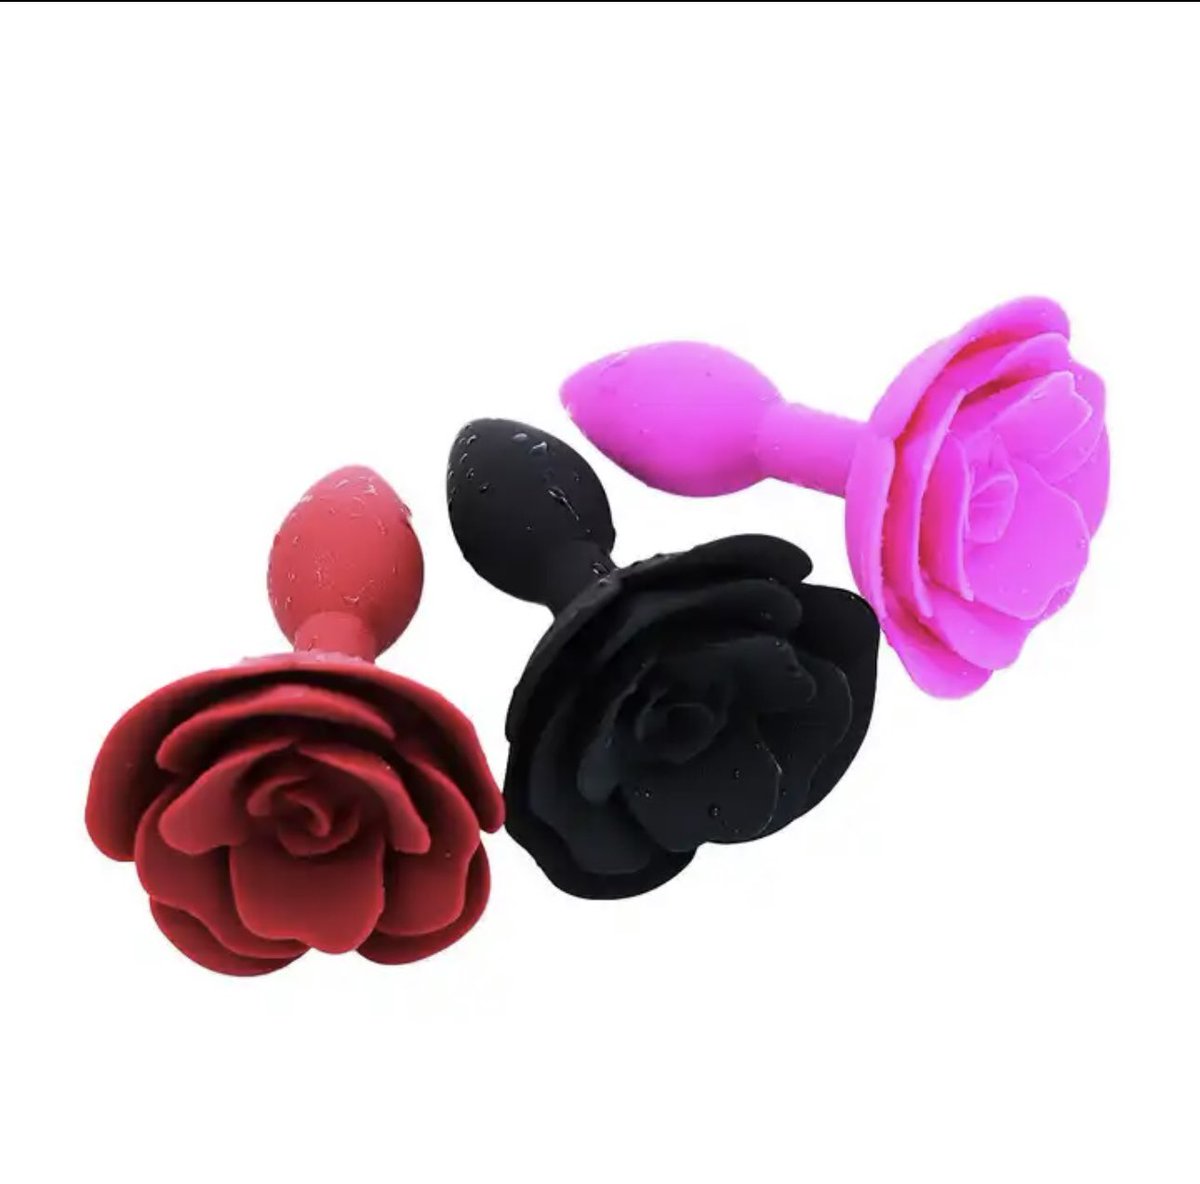 New anal plugs available for pre order!!! #analplug #sextoys #sexstore #onlinesexstore #porn